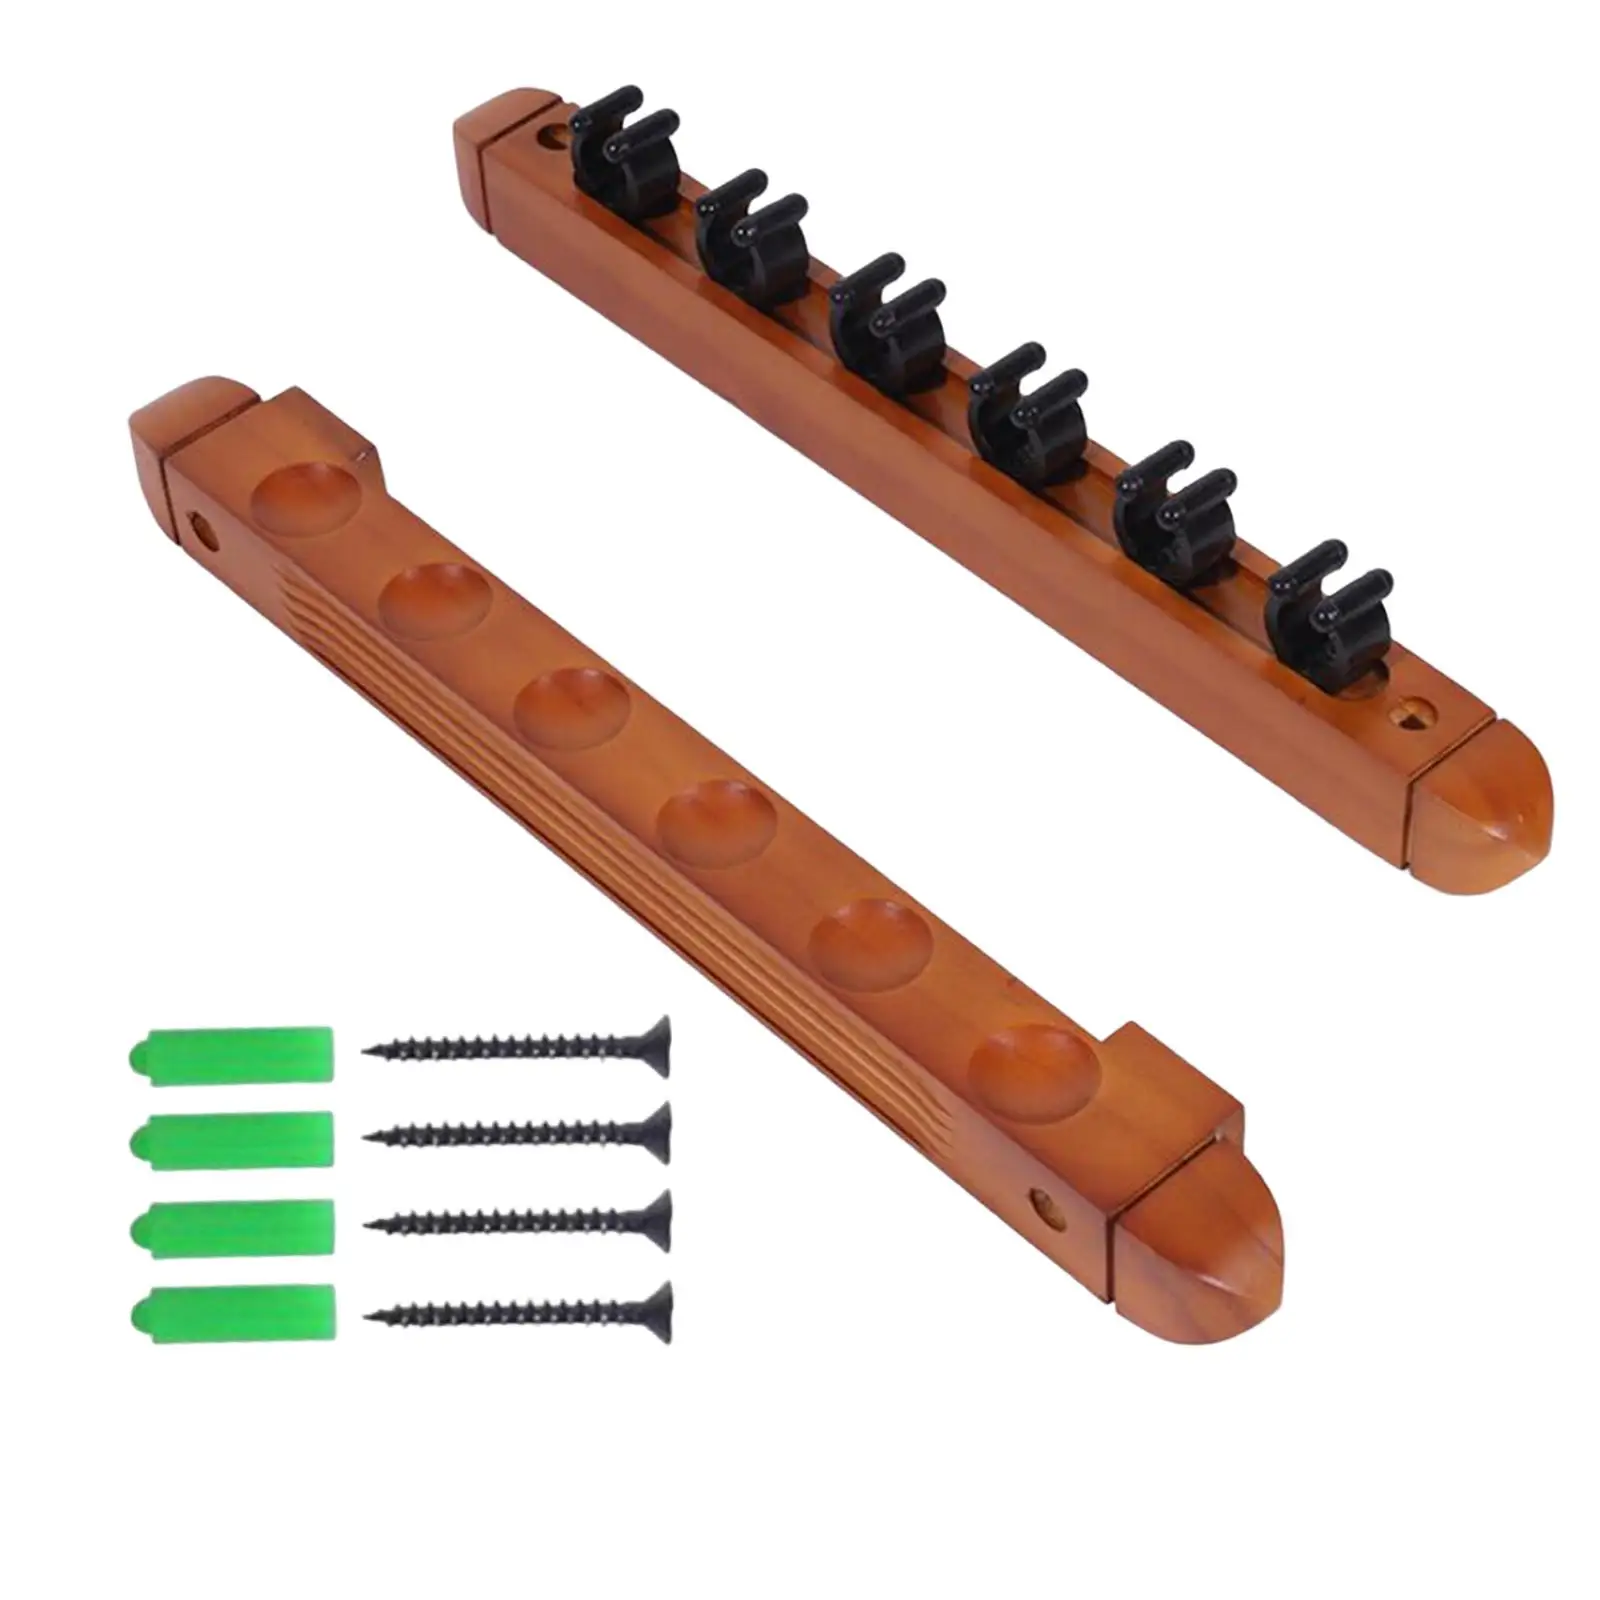 Cue Holder Billiard Cue Wall Racks 6 Cue Clips Accessory with Screws for or Home Billiards Usage